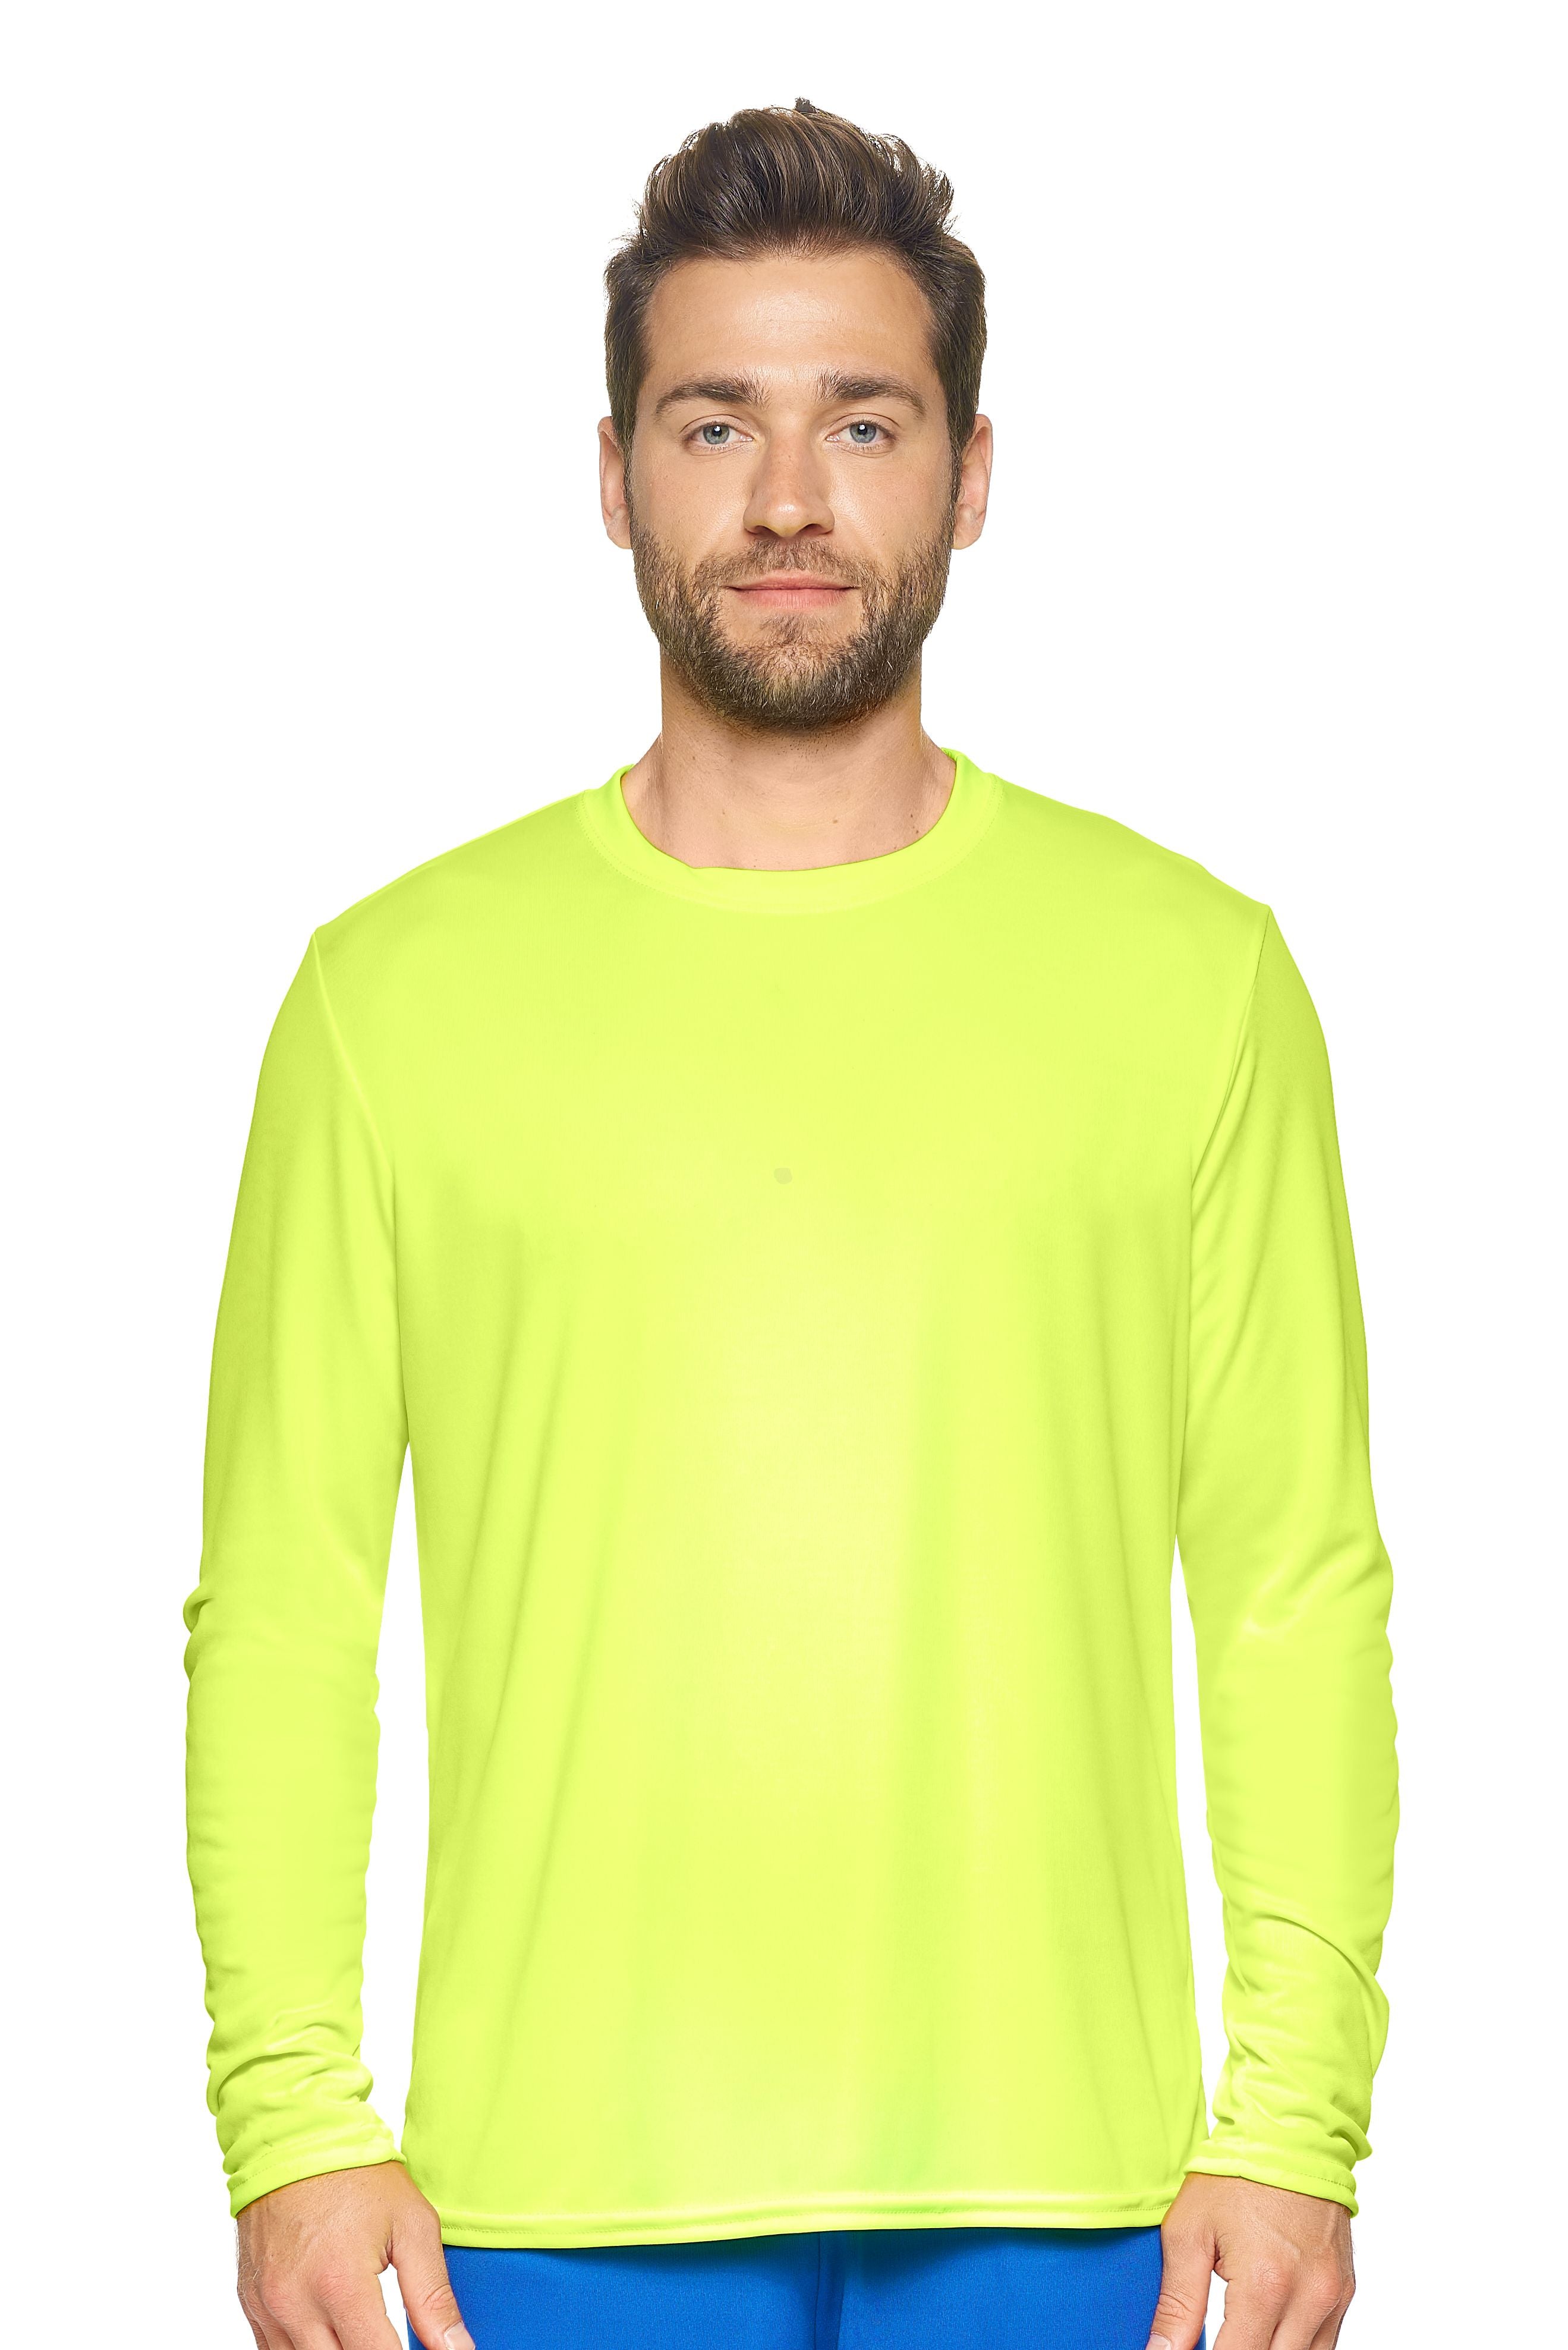 AI801D DriMax Long Sleeve Expert Tee safety yellow#safety-yellow